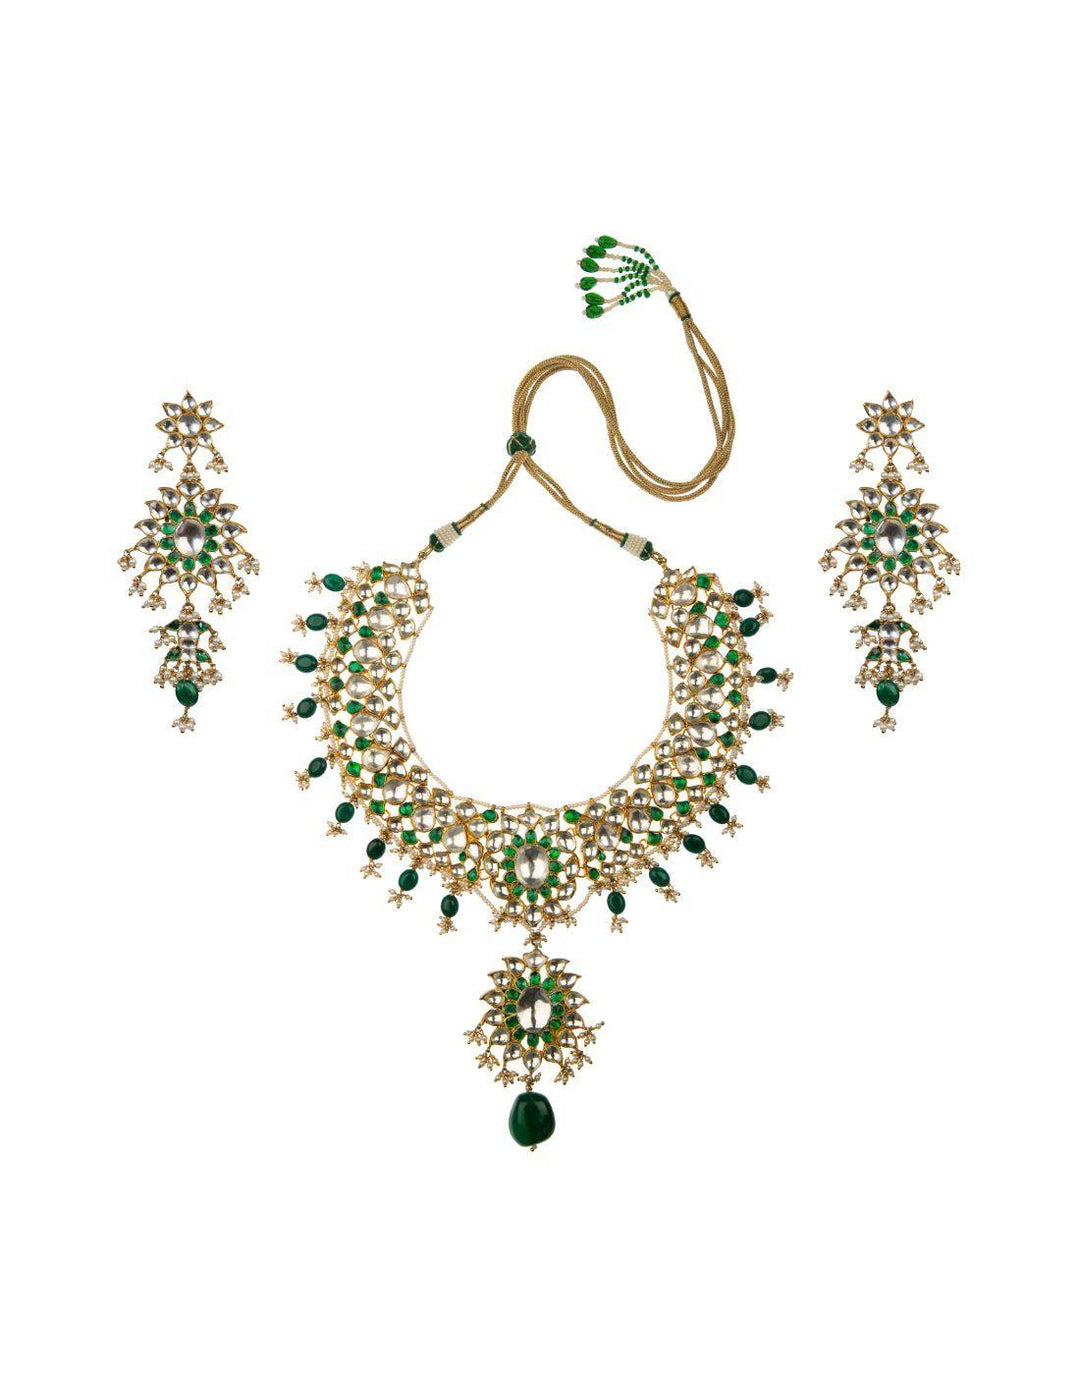 22k Gold Plated Emerald & Ivory Pearl Bridal Necklace Set-Accessories-Glamourental